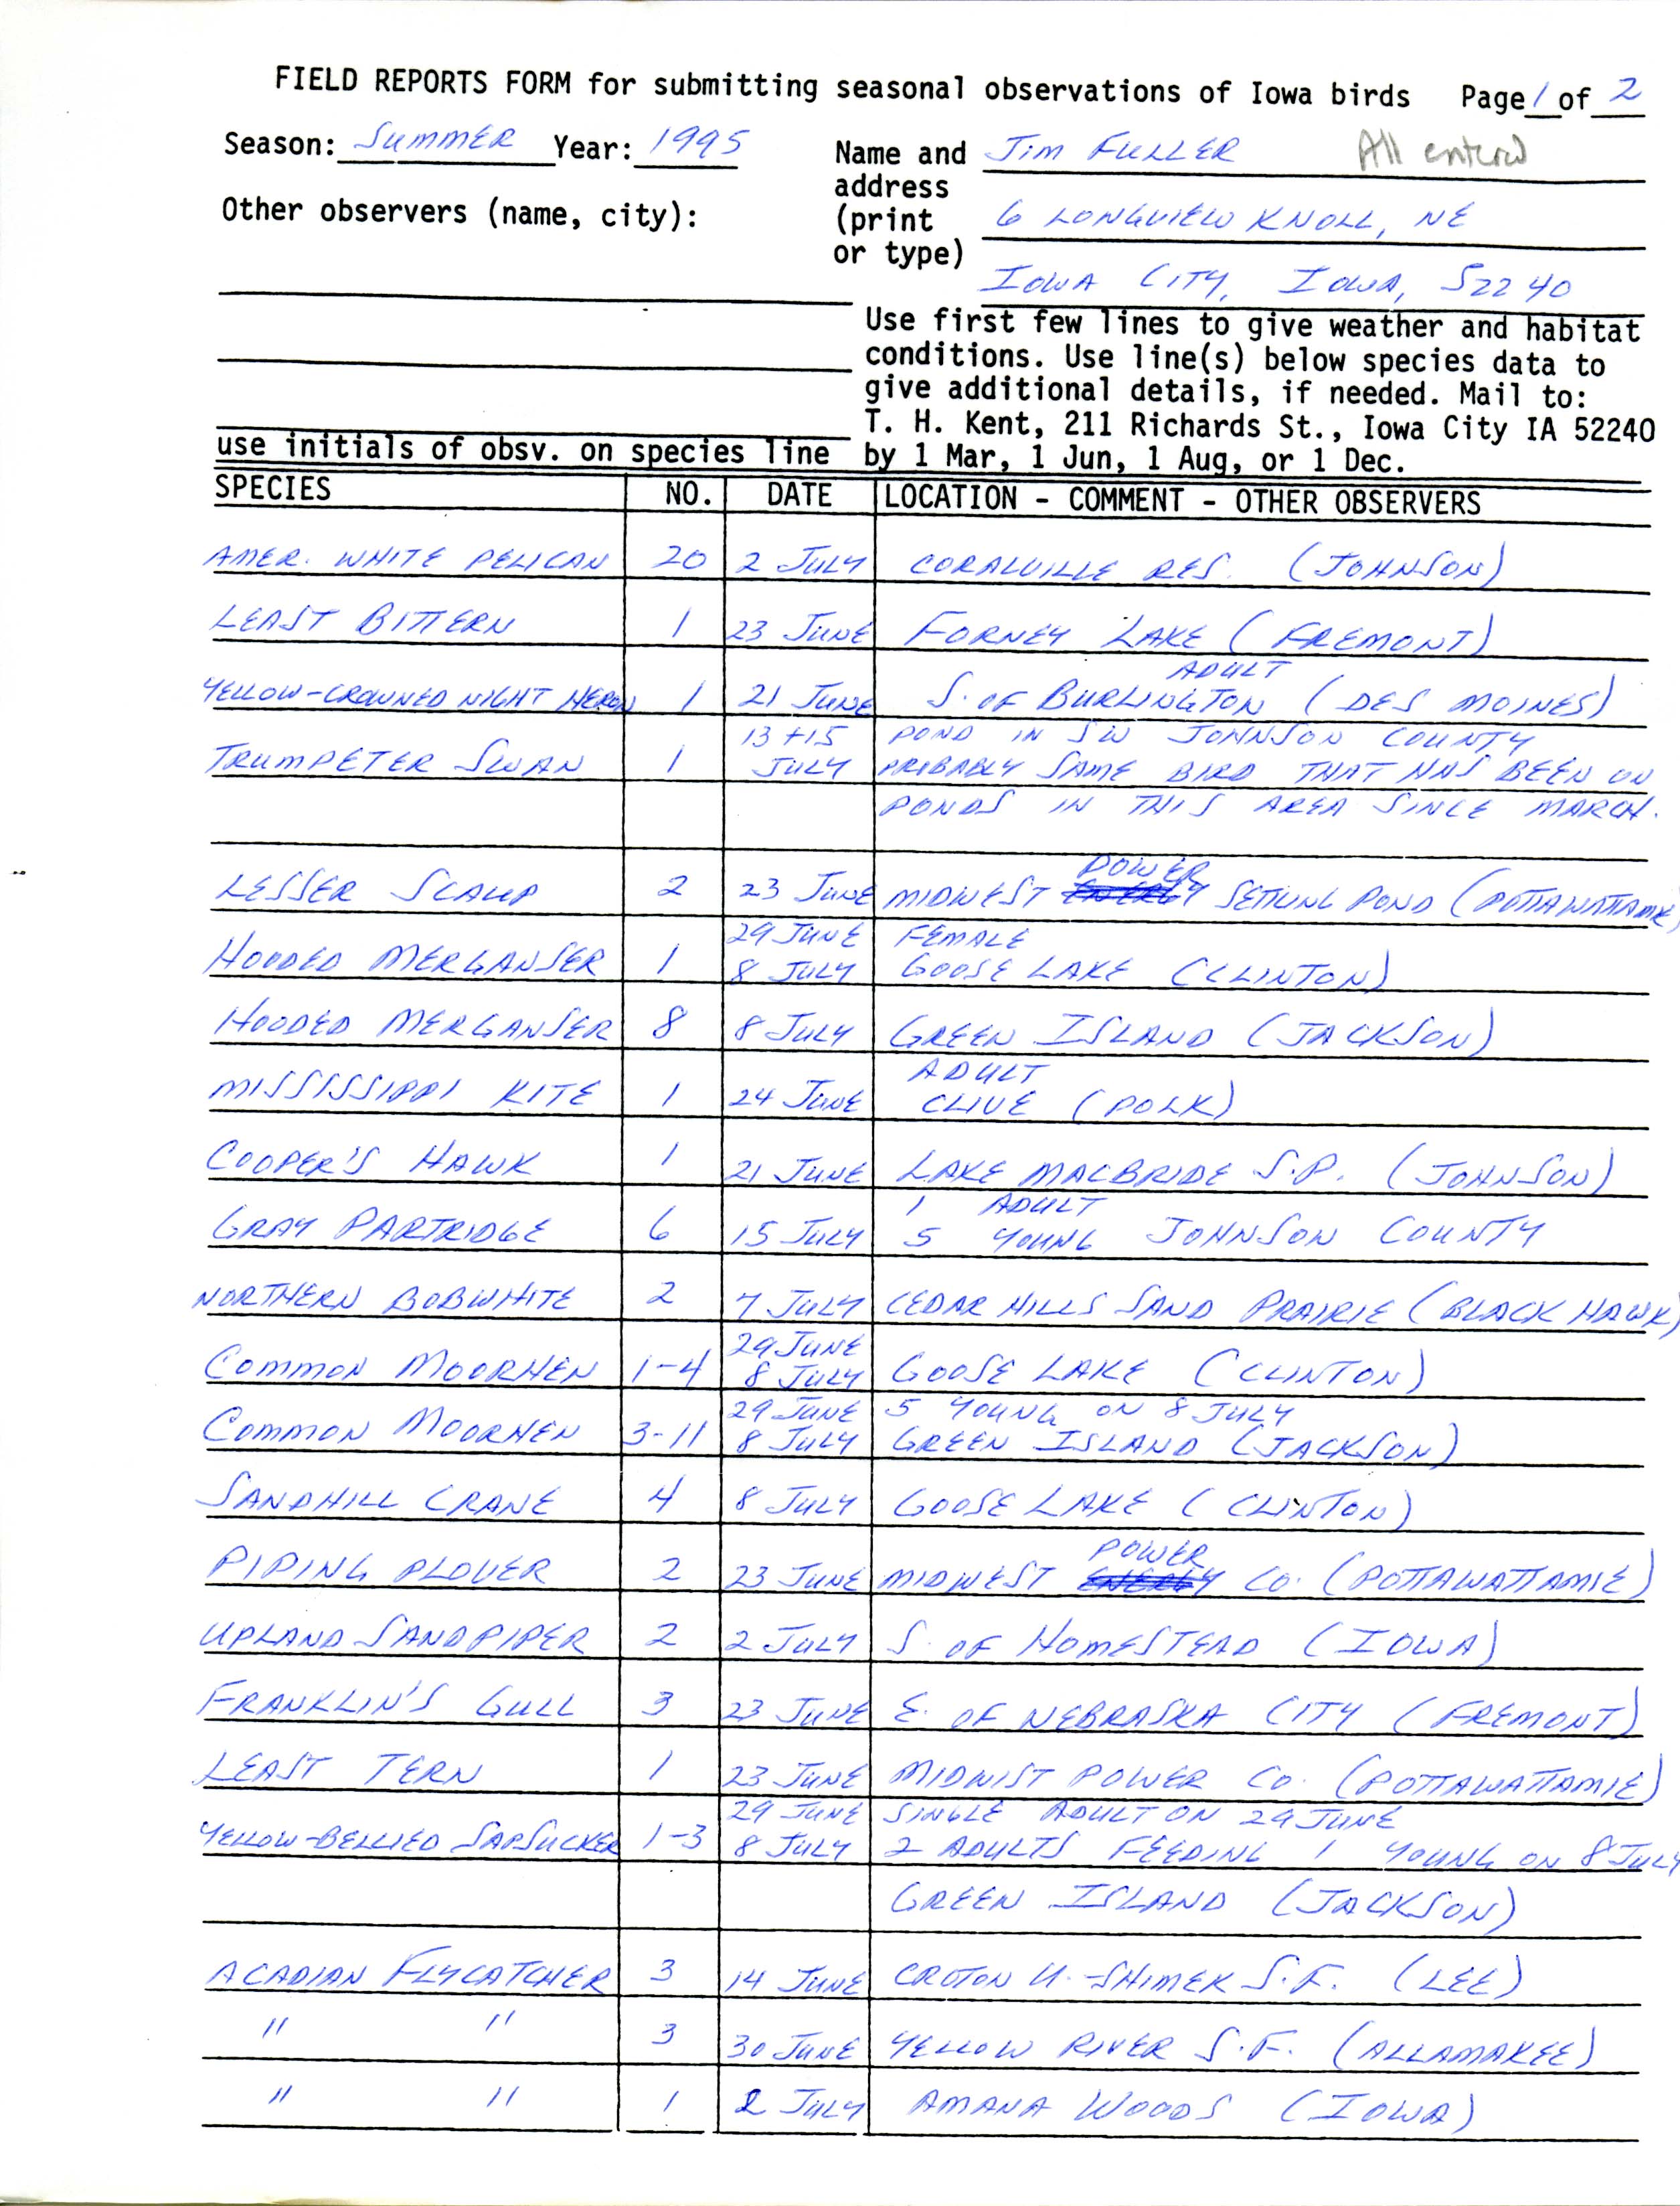 Field reports form for submitting seasonal observations of Iowa birds, summer 1995, Jim Fuller